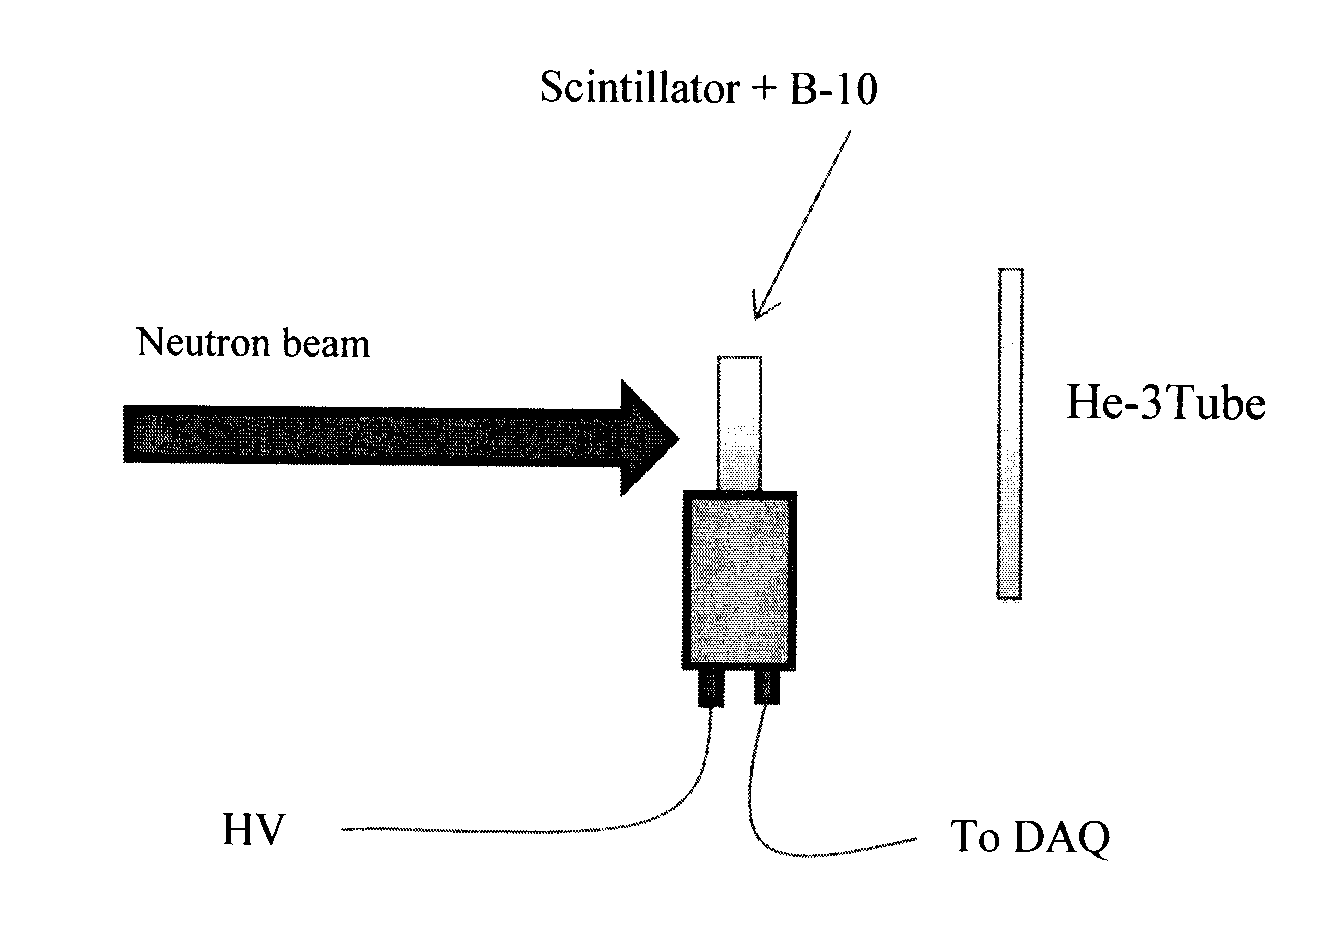 Boron-loaded liquid scintillator compositions and methods of preparation thereof